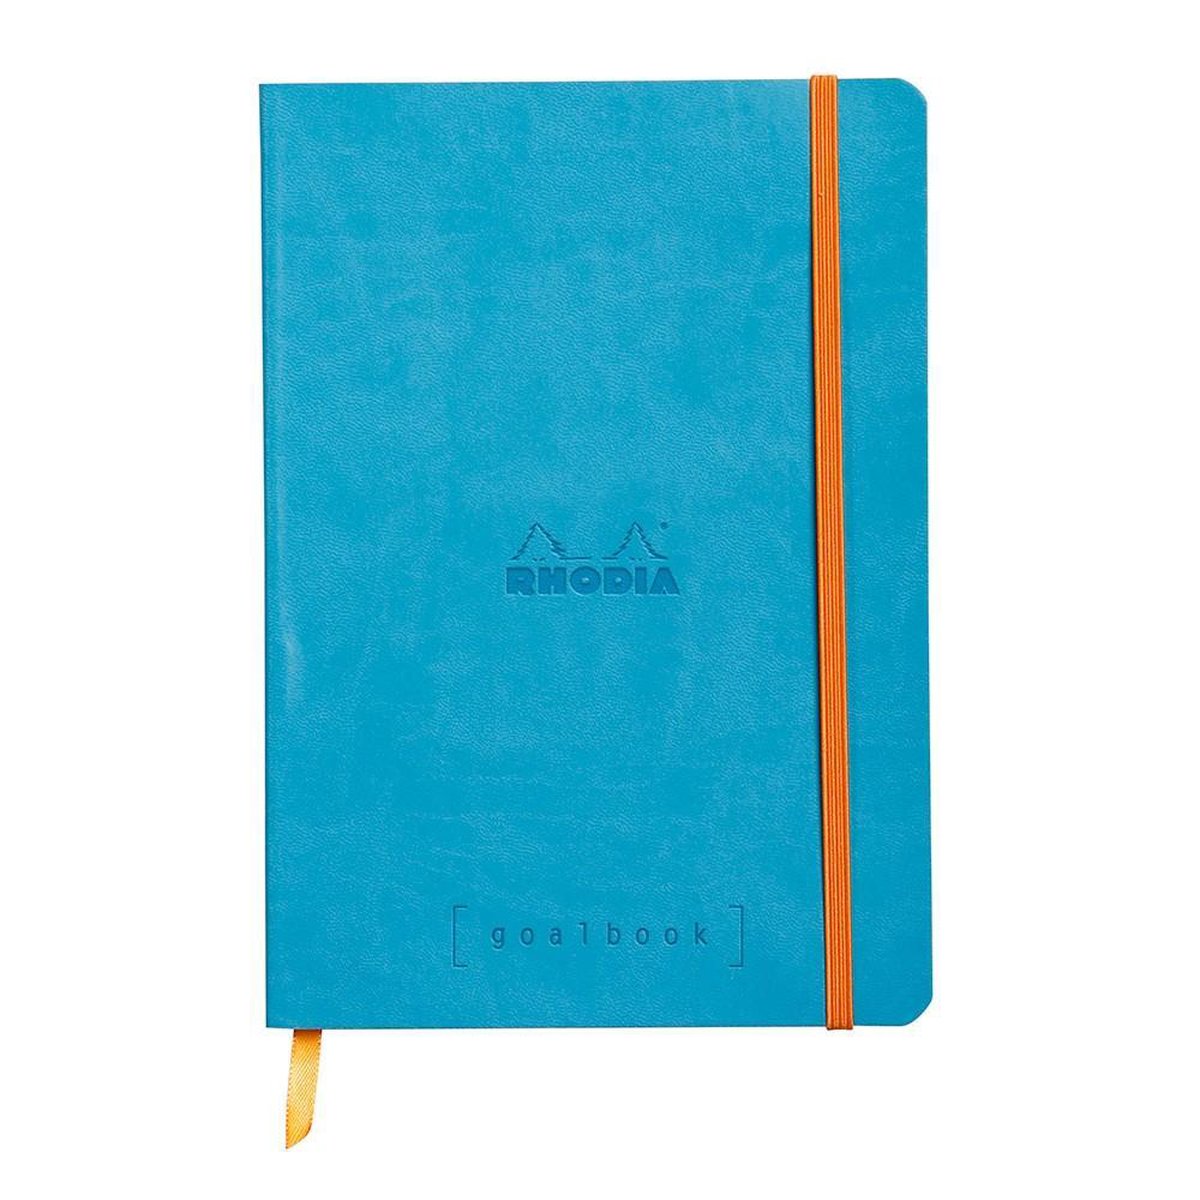 Rhodia Goalbook – Bullet Journal – A5 – 14,8x21cm – Gestippeld – Dotted – Turquoise